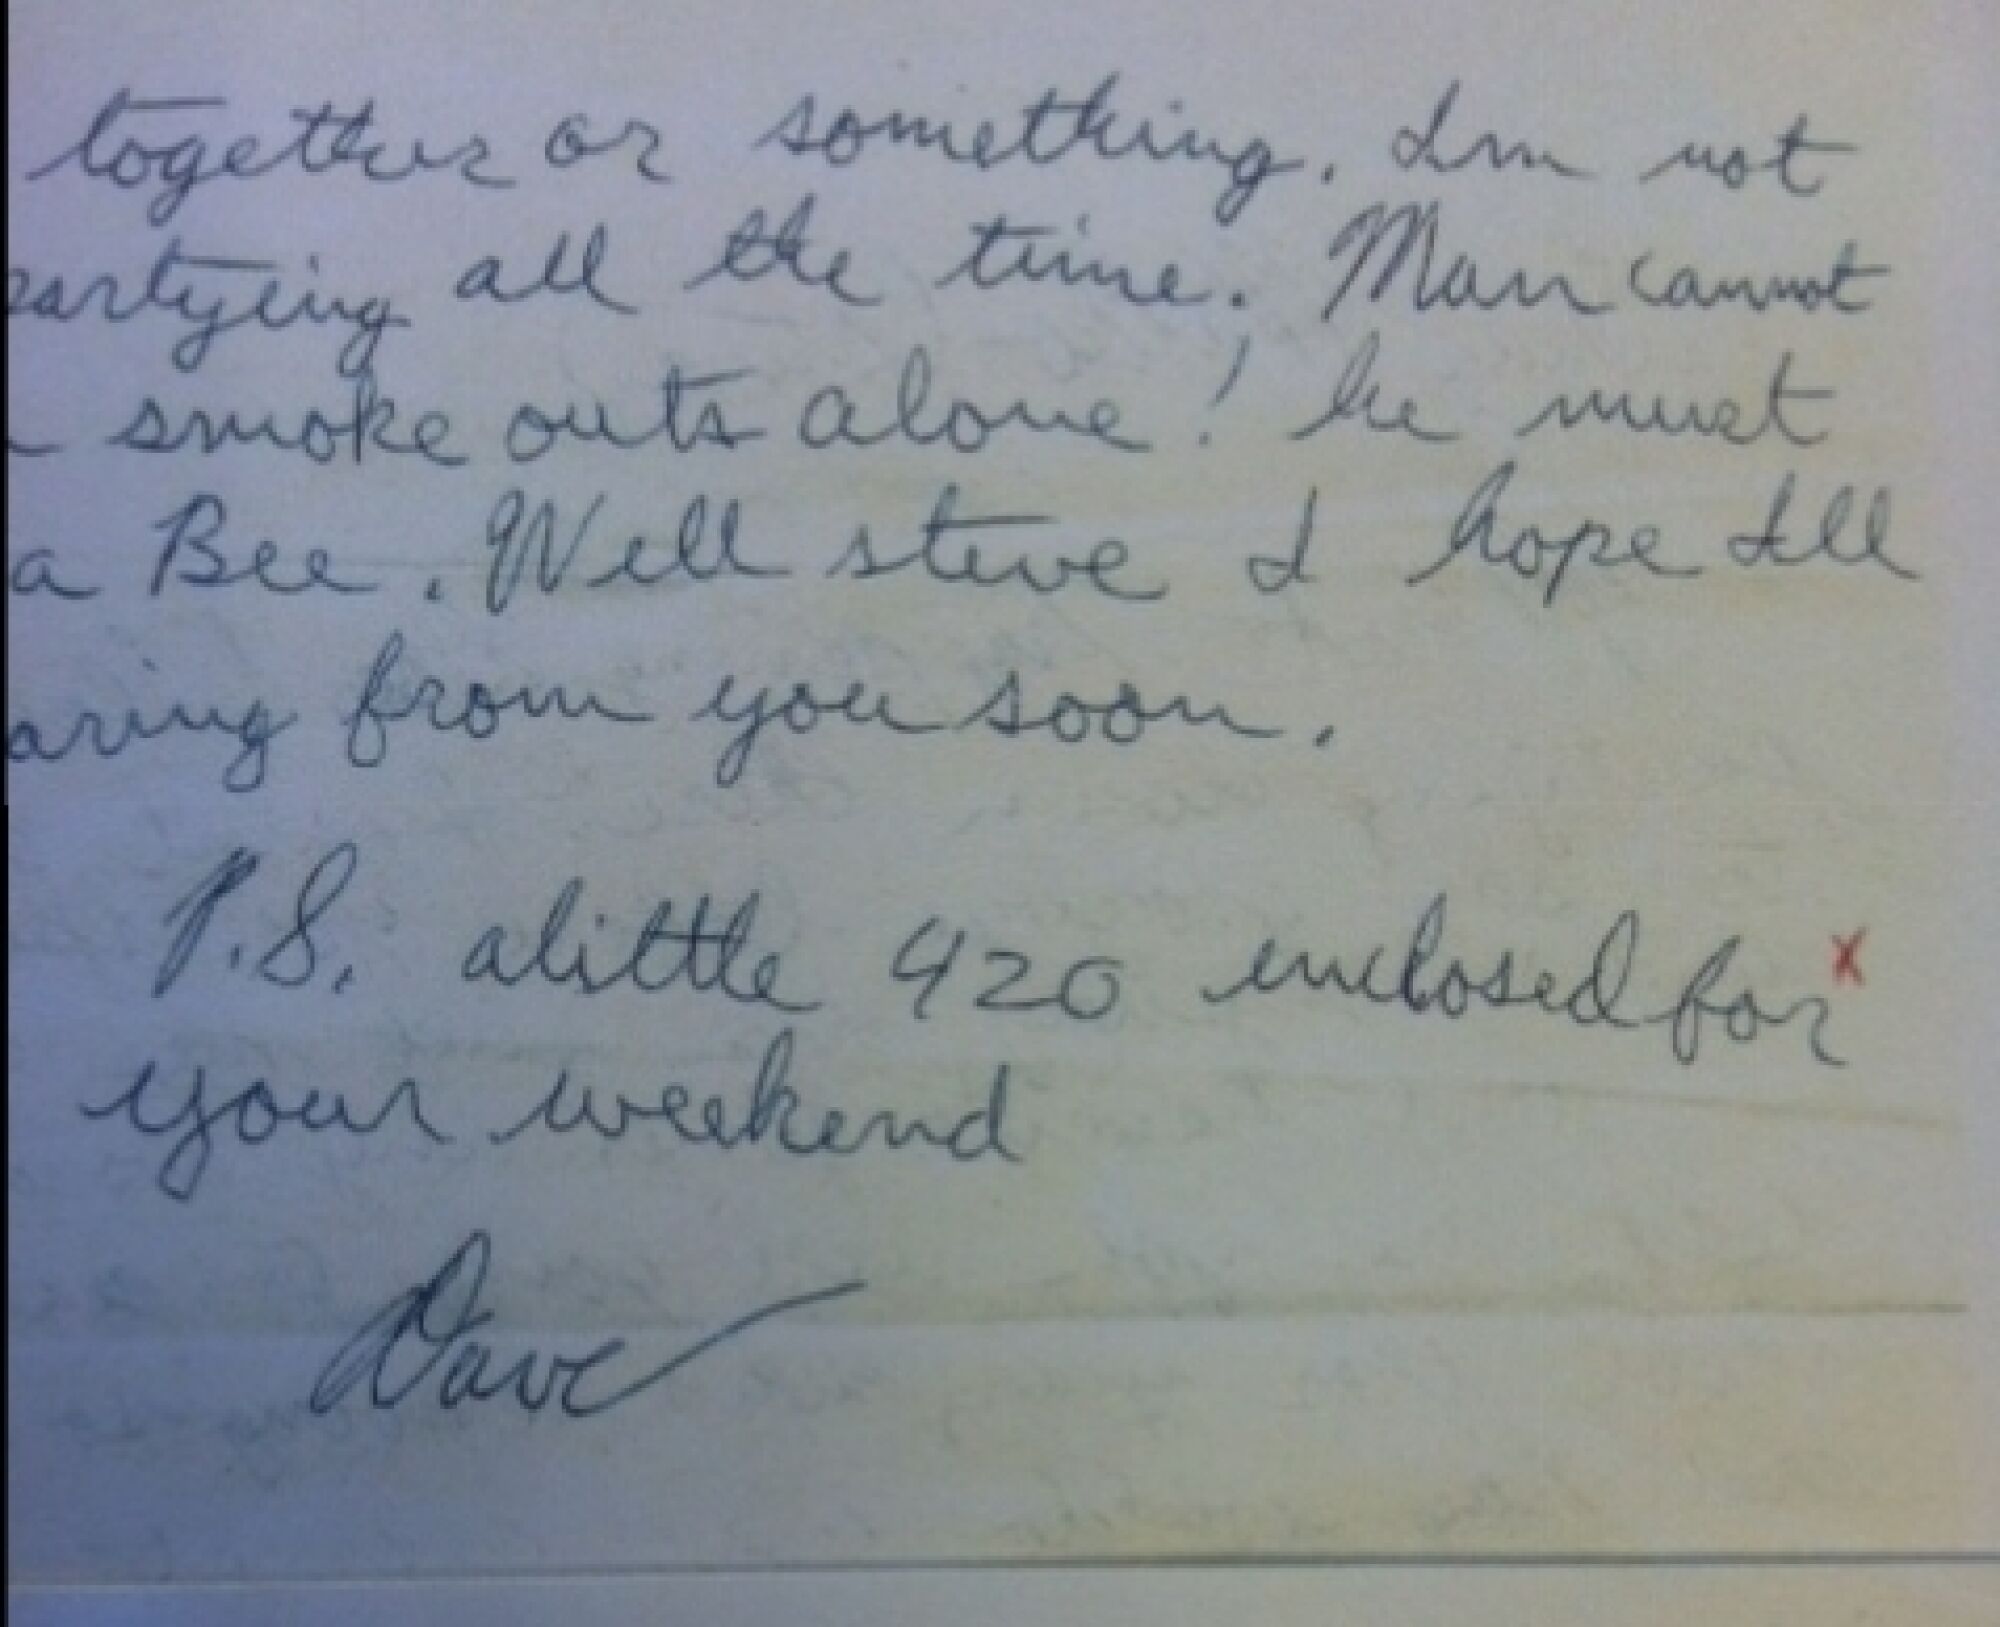 A letter from the early '70s with a "420" reference